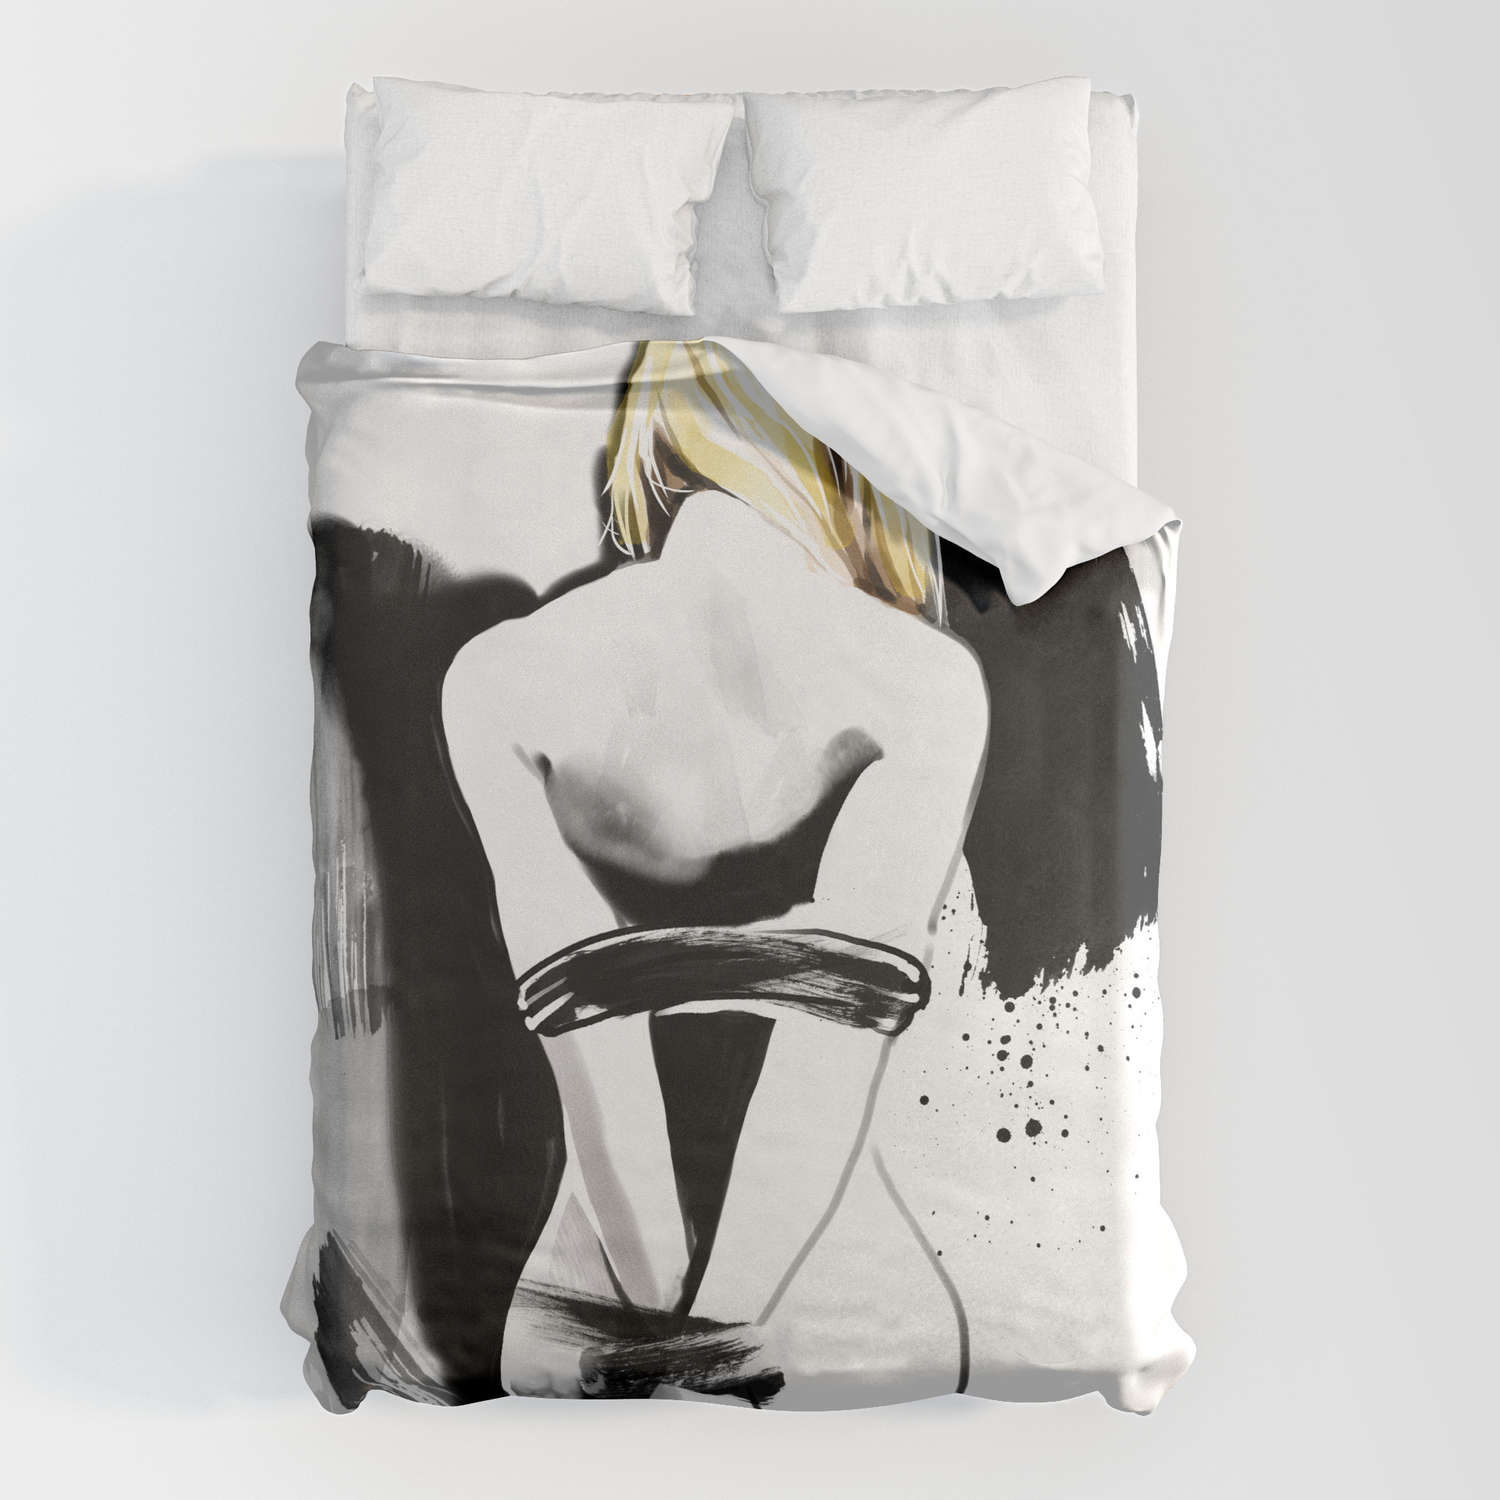 NUDE HOT PILLOWS CUSHIONS AND